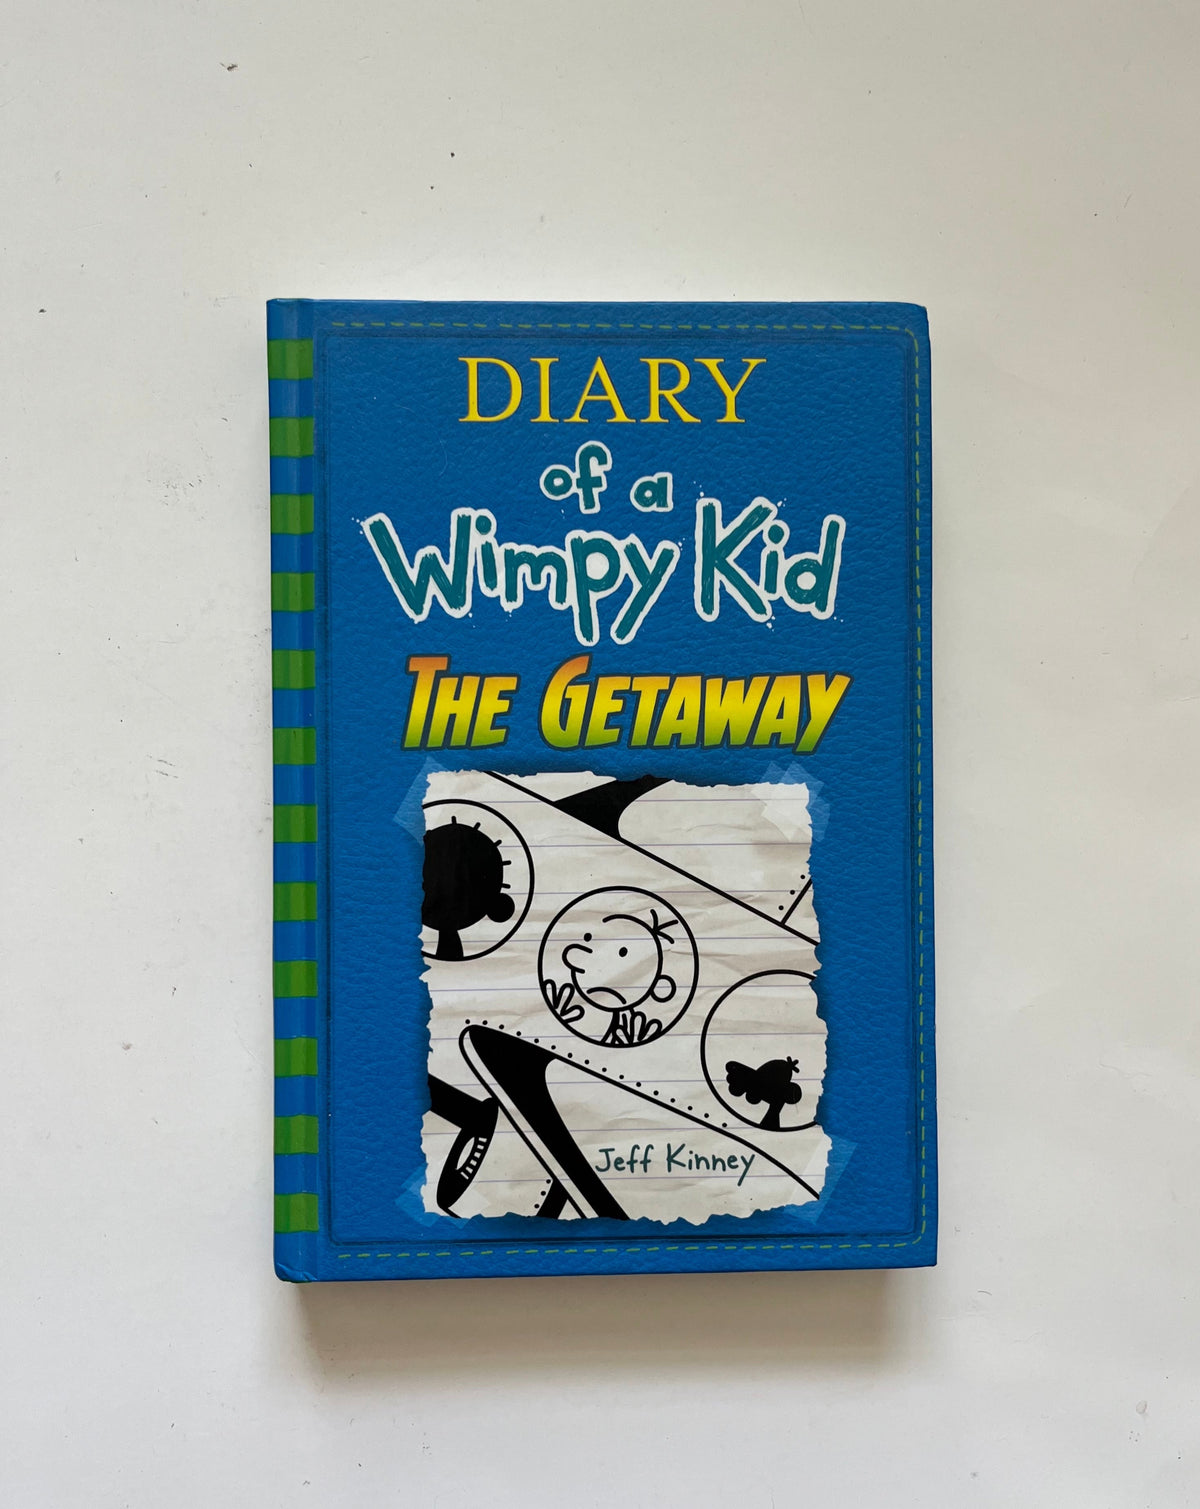 Diary of a Wimpy Kid: The Getaway by Jeff Kinney